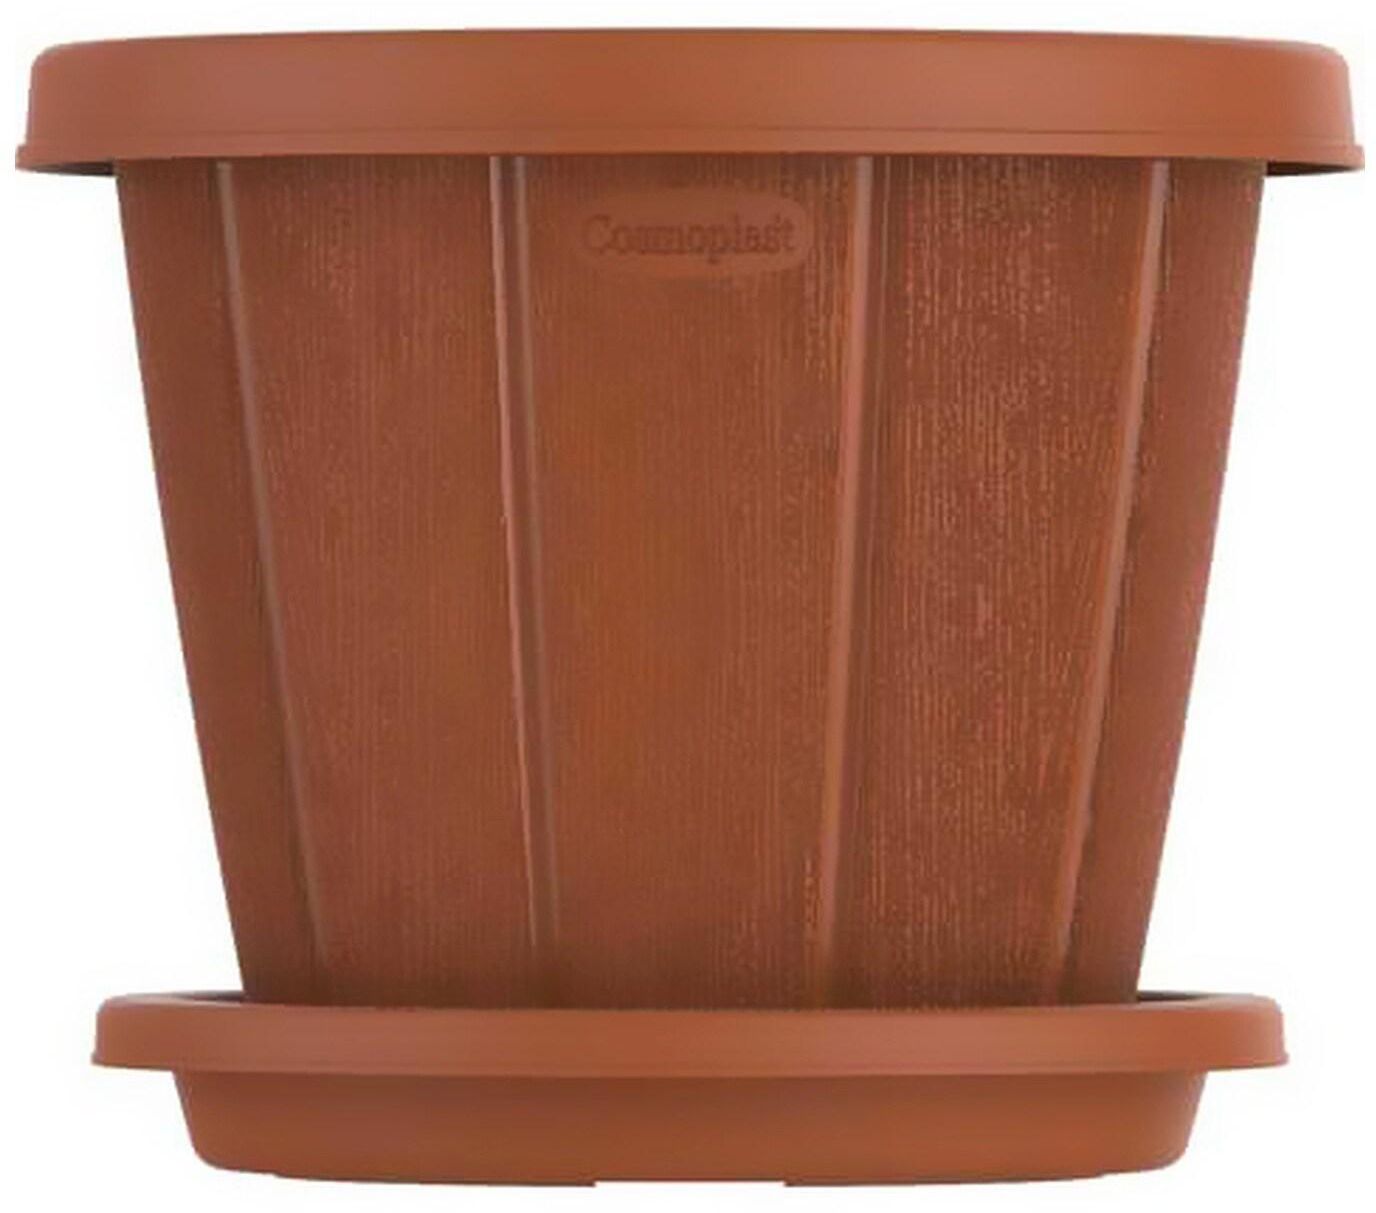 Cosmoplast Woodgrain Flower Pot With Tray Brown 16inch